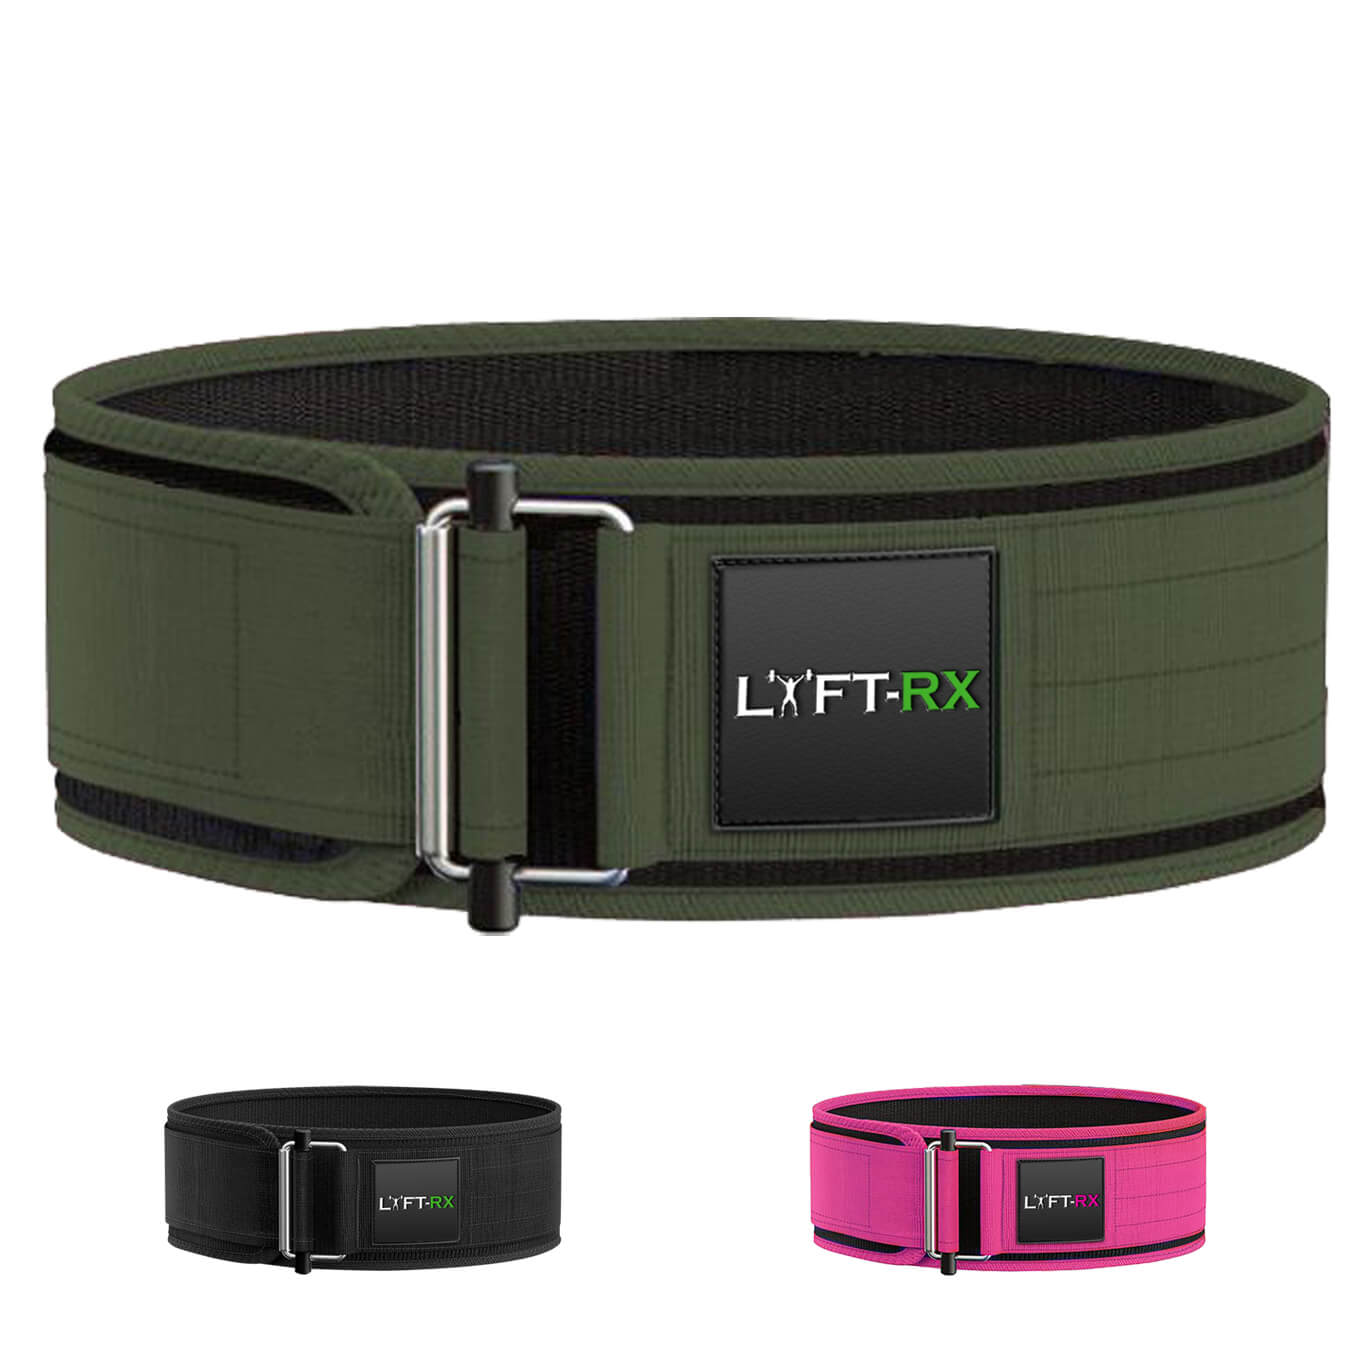 Astra Fitness Weight Lifting Belt - Auto-Locking Weightlifting Belt for  Powerlifting, Deadlifts, Squats, and Crossfit Training, 3 Inch Velcro  Weight